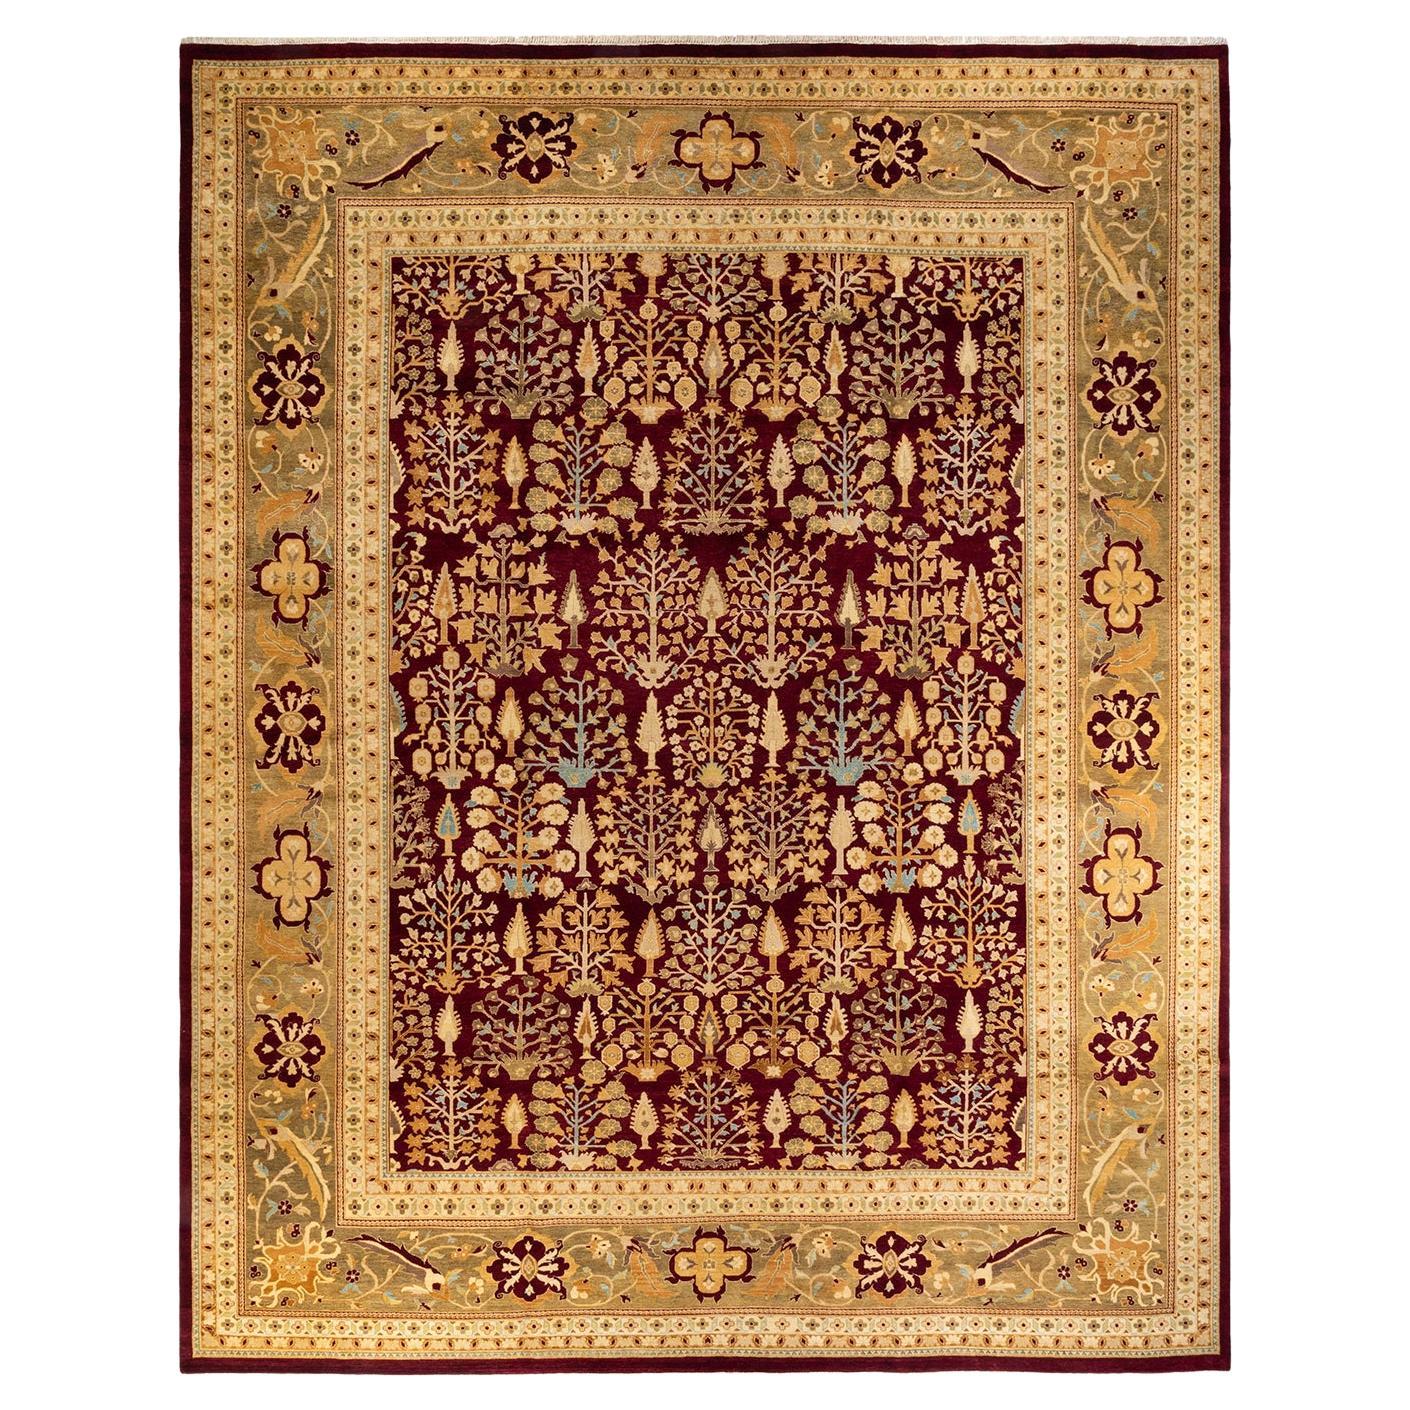 One-of-a-kind Hand Knotted Floral Eclectic Red Area Rug